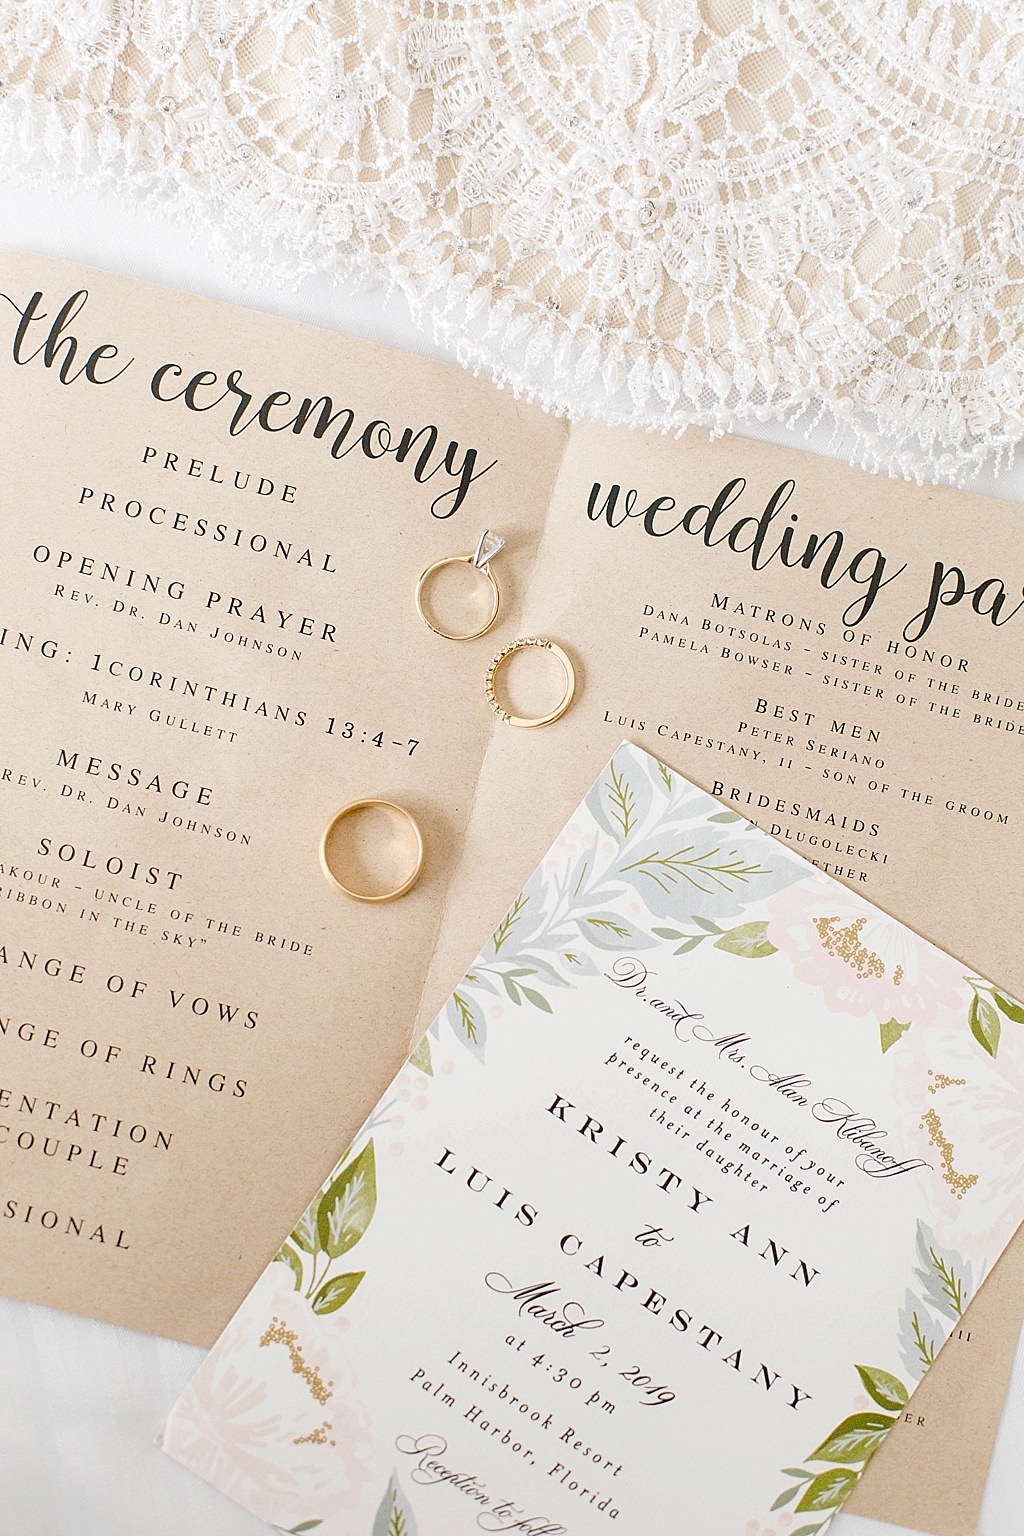 Rustic, Floral Wedding Invitation and Wedding Ceremony Program with Wedding Rings Portrait